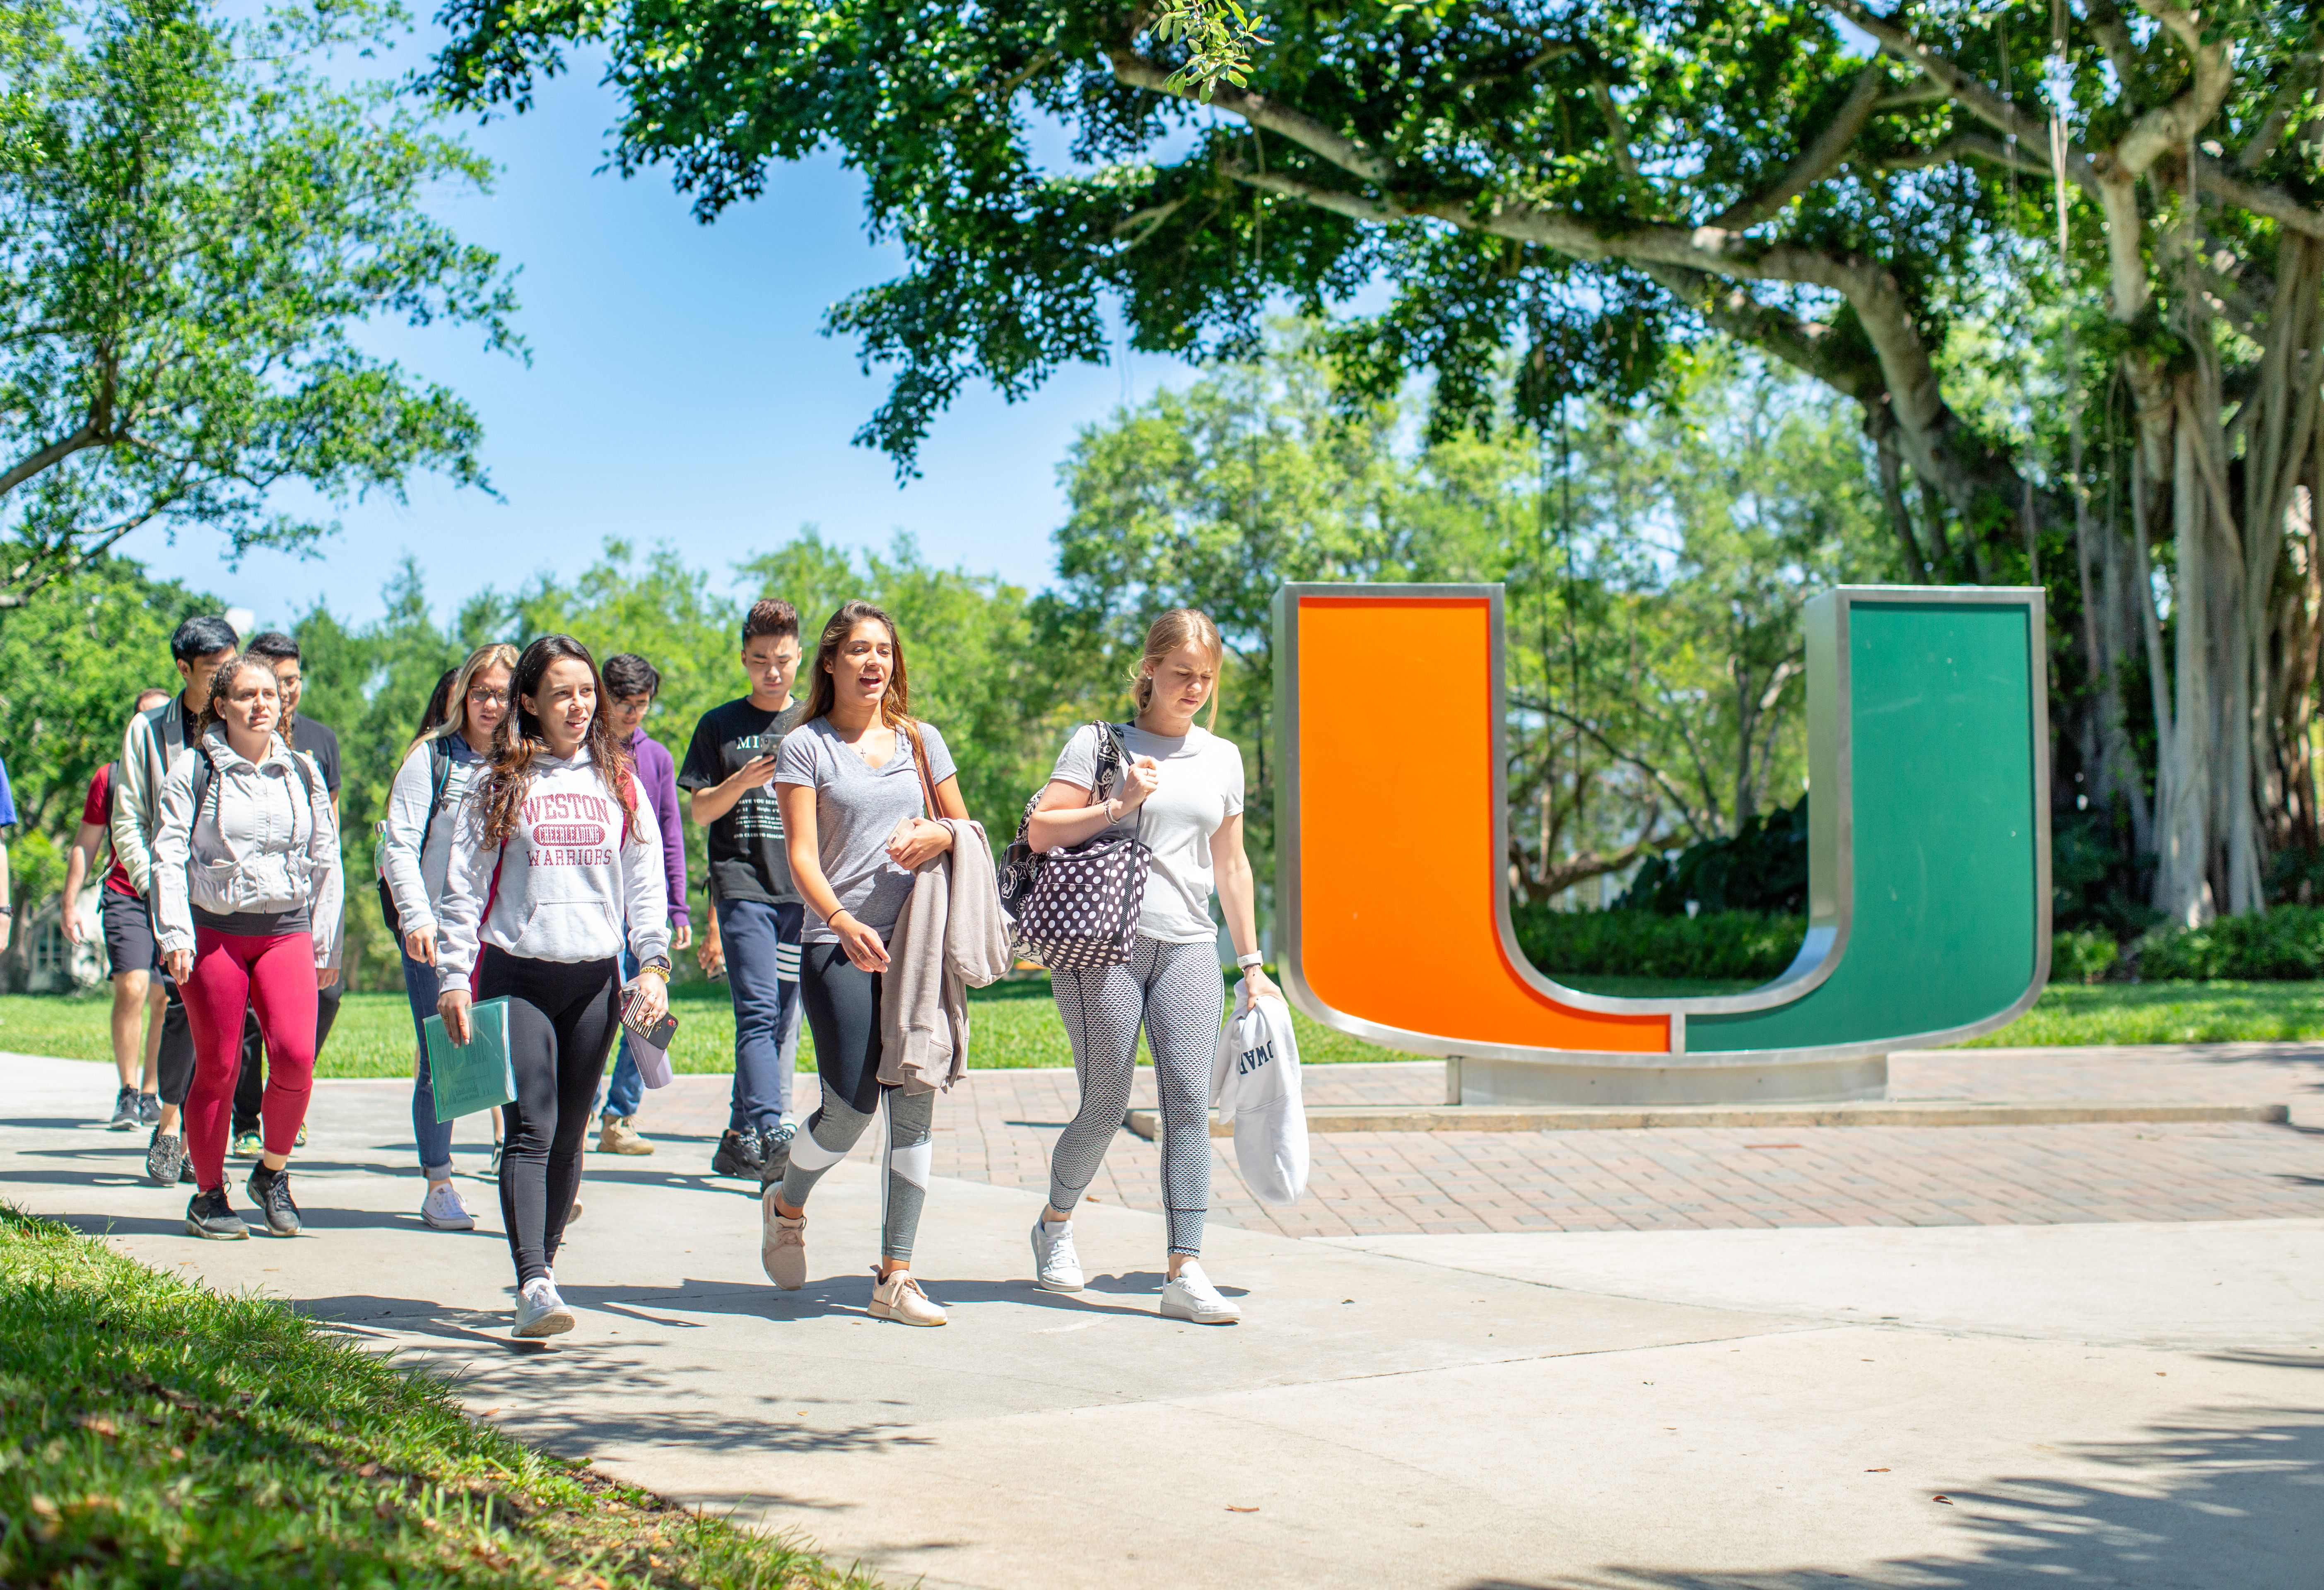 Students on campus walking in front of the orange and green U statue.